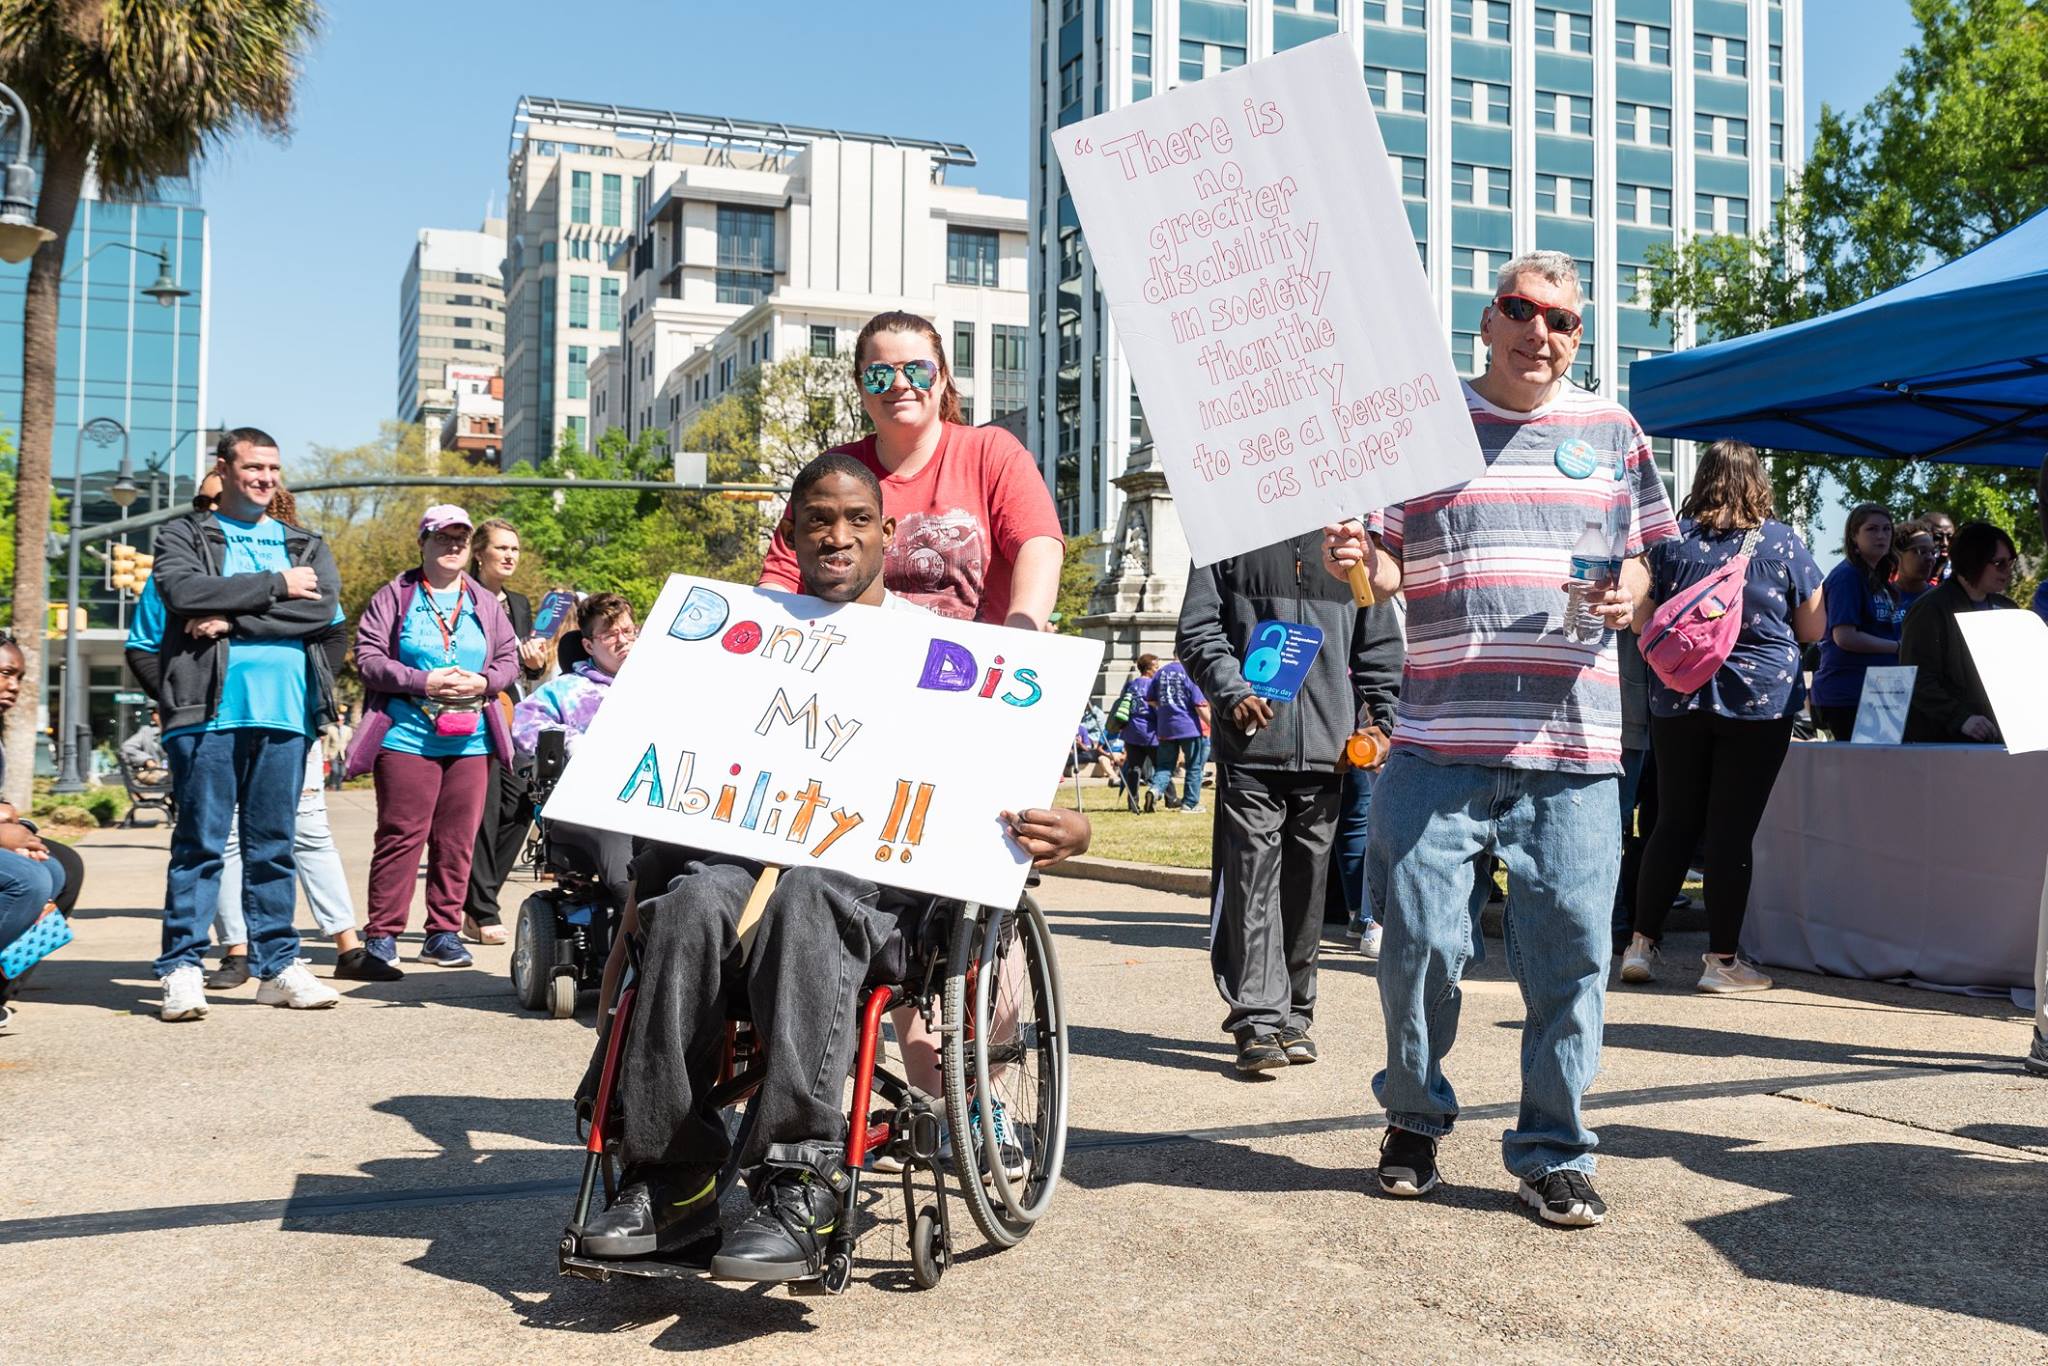 A crowd of diverse people with disabilities hold signs of support for disability rights at the annual Advocacy Day for Access and Independence